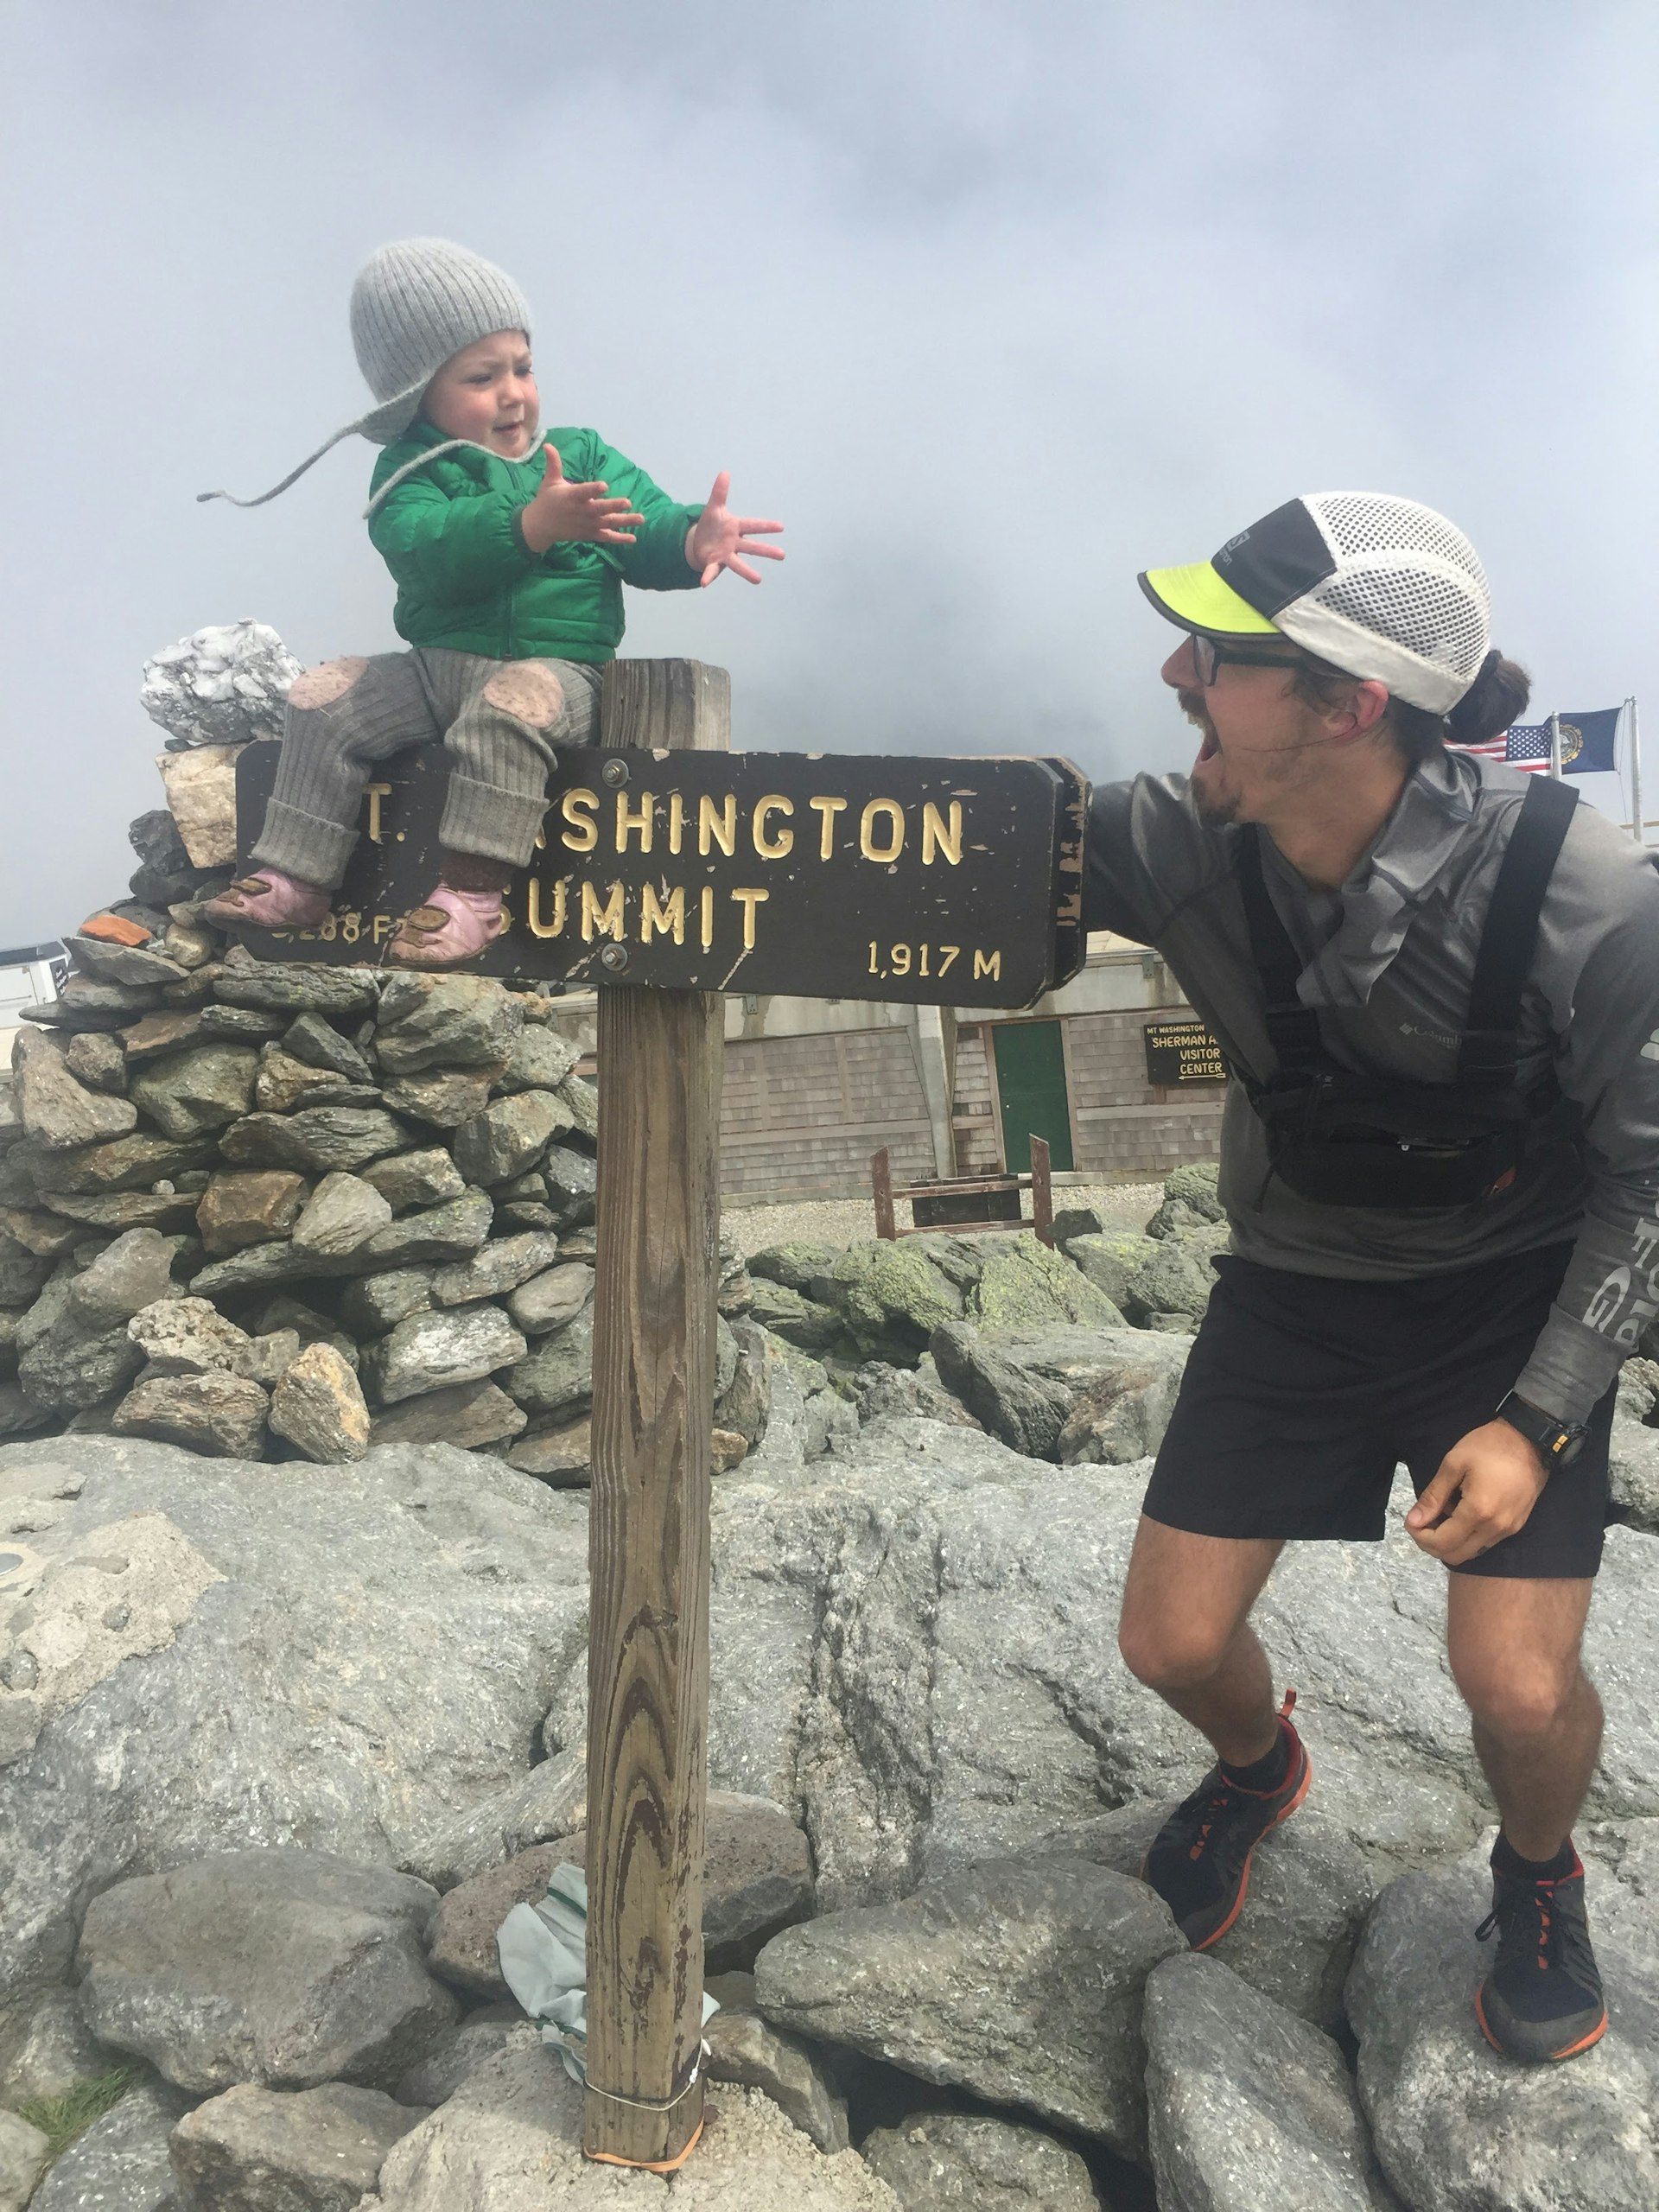 Ellie Quirin, one of the youngest people ever to summit Mount Washington pictured with her father, Derrick Quirin